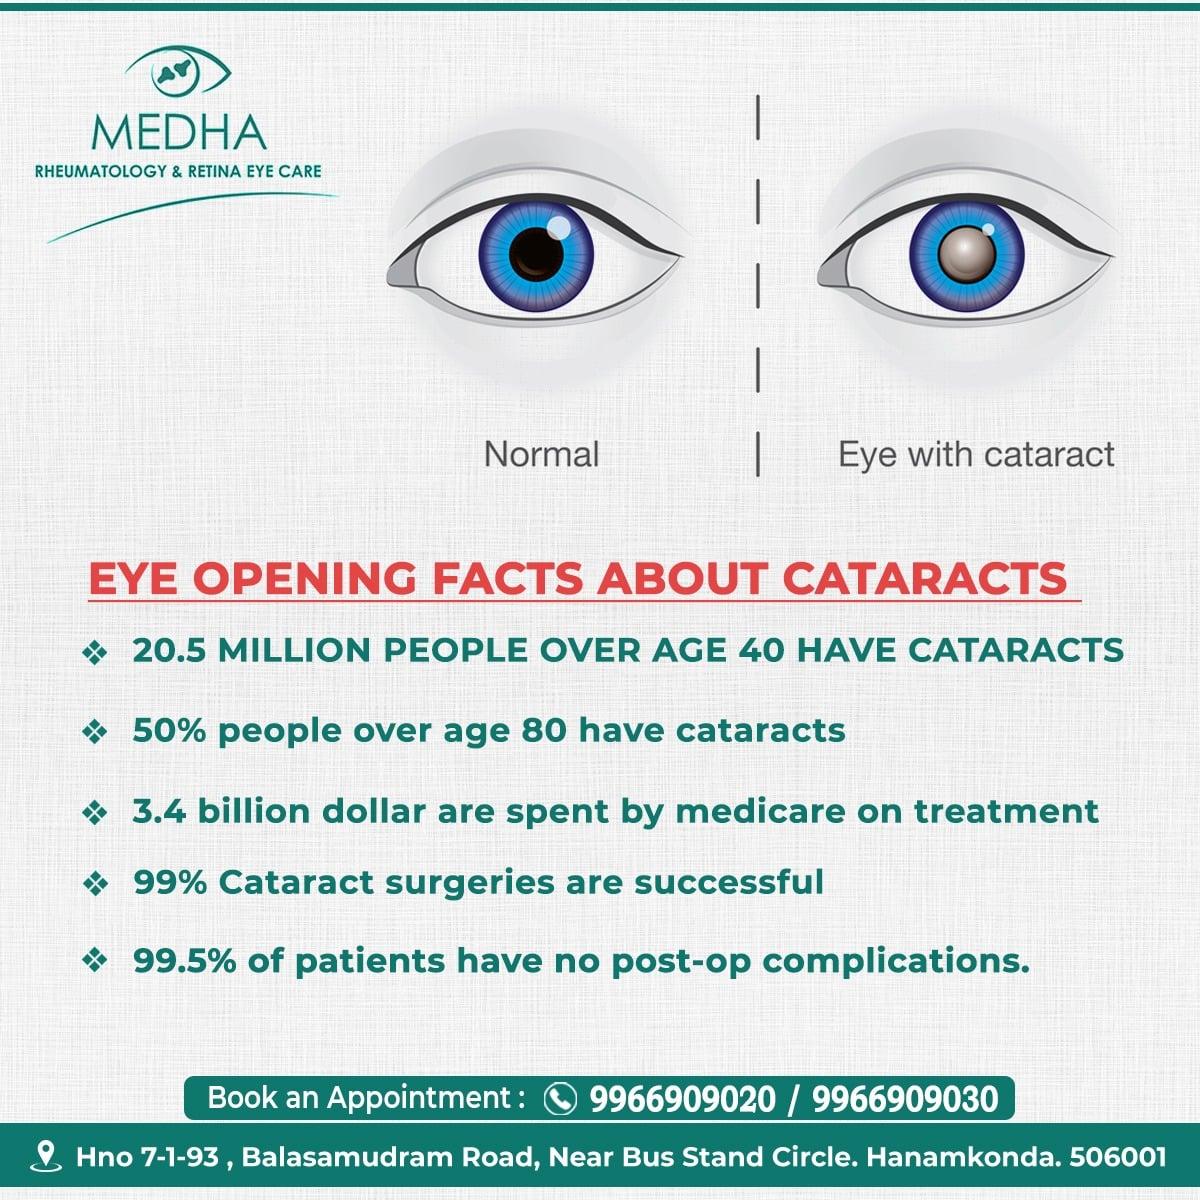 Few FACTS about Cataracts you should know ....